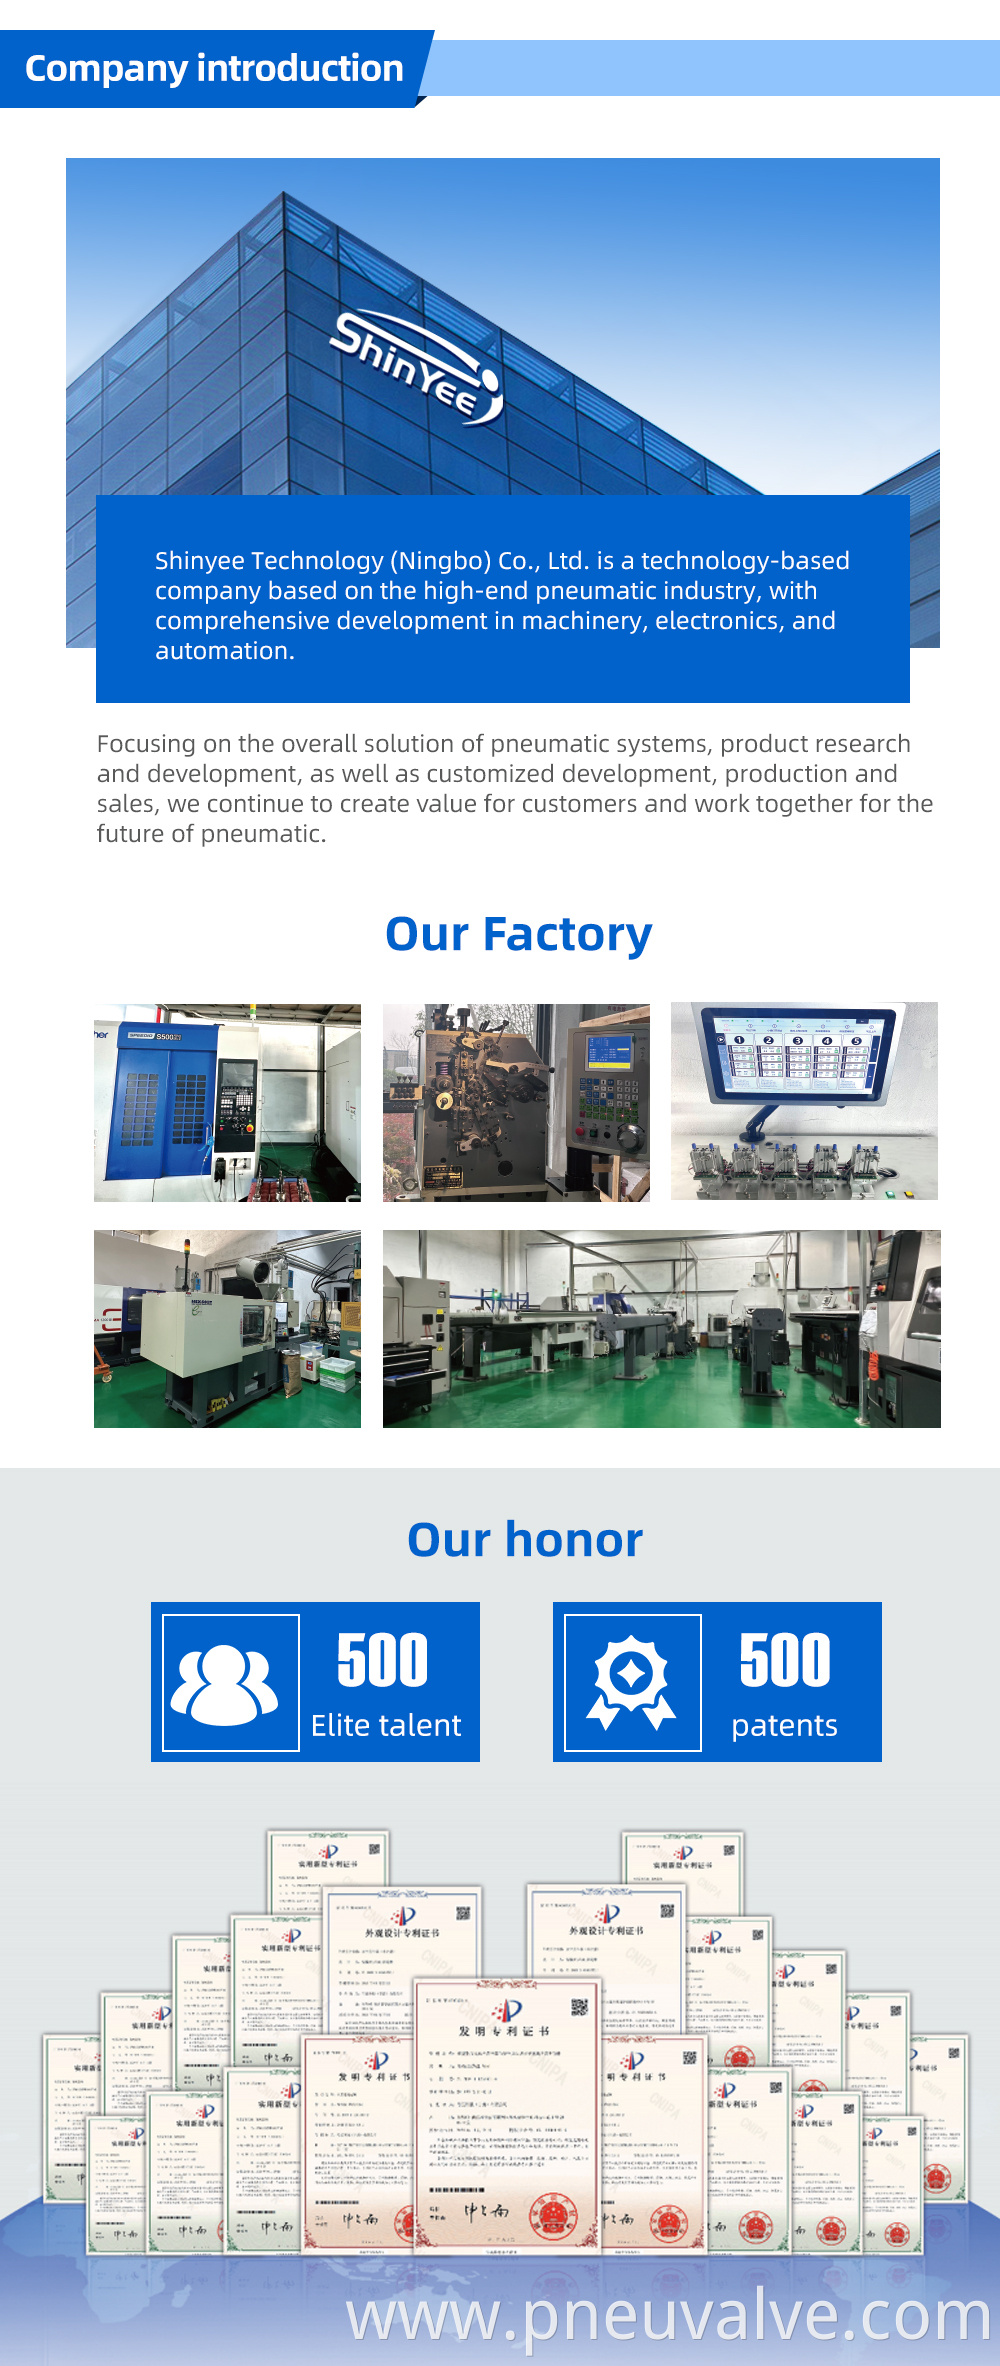 shinsee Company introduction